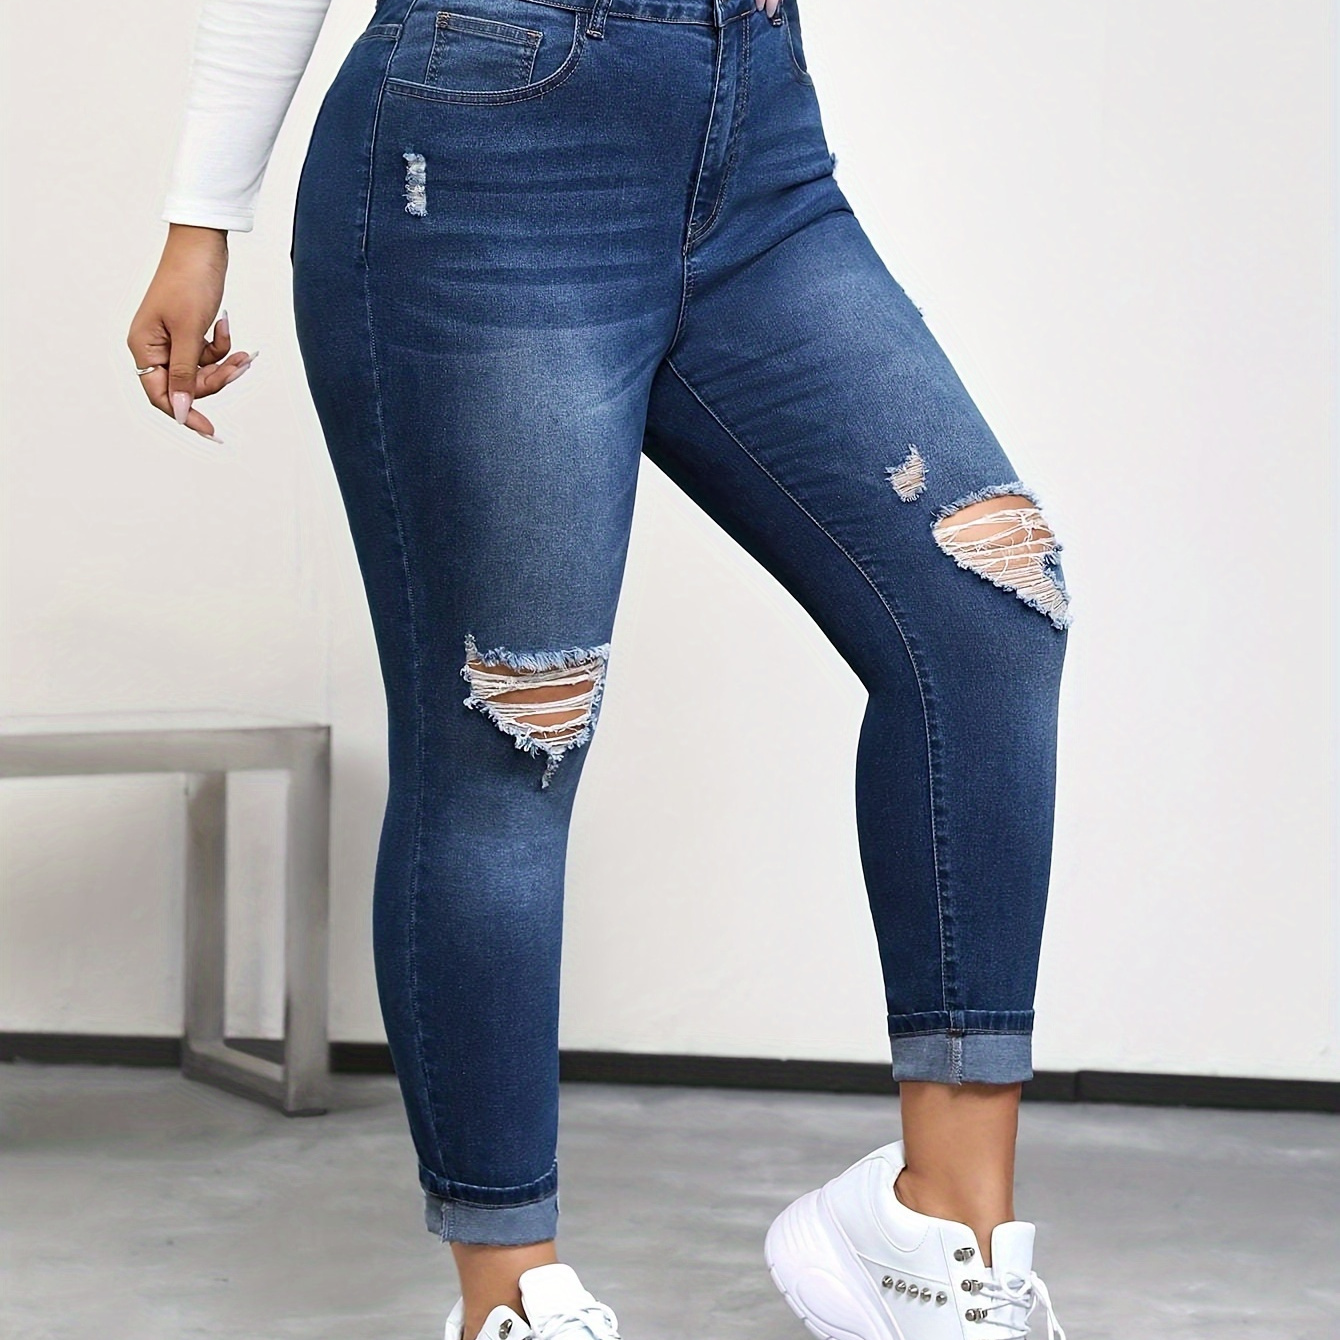 

Women's Plus Size High Waist Skinny Stretch Ripped Jeans Fashion Style, Elegant Distressed Denim Pants With Pockets, Casual Streetwear